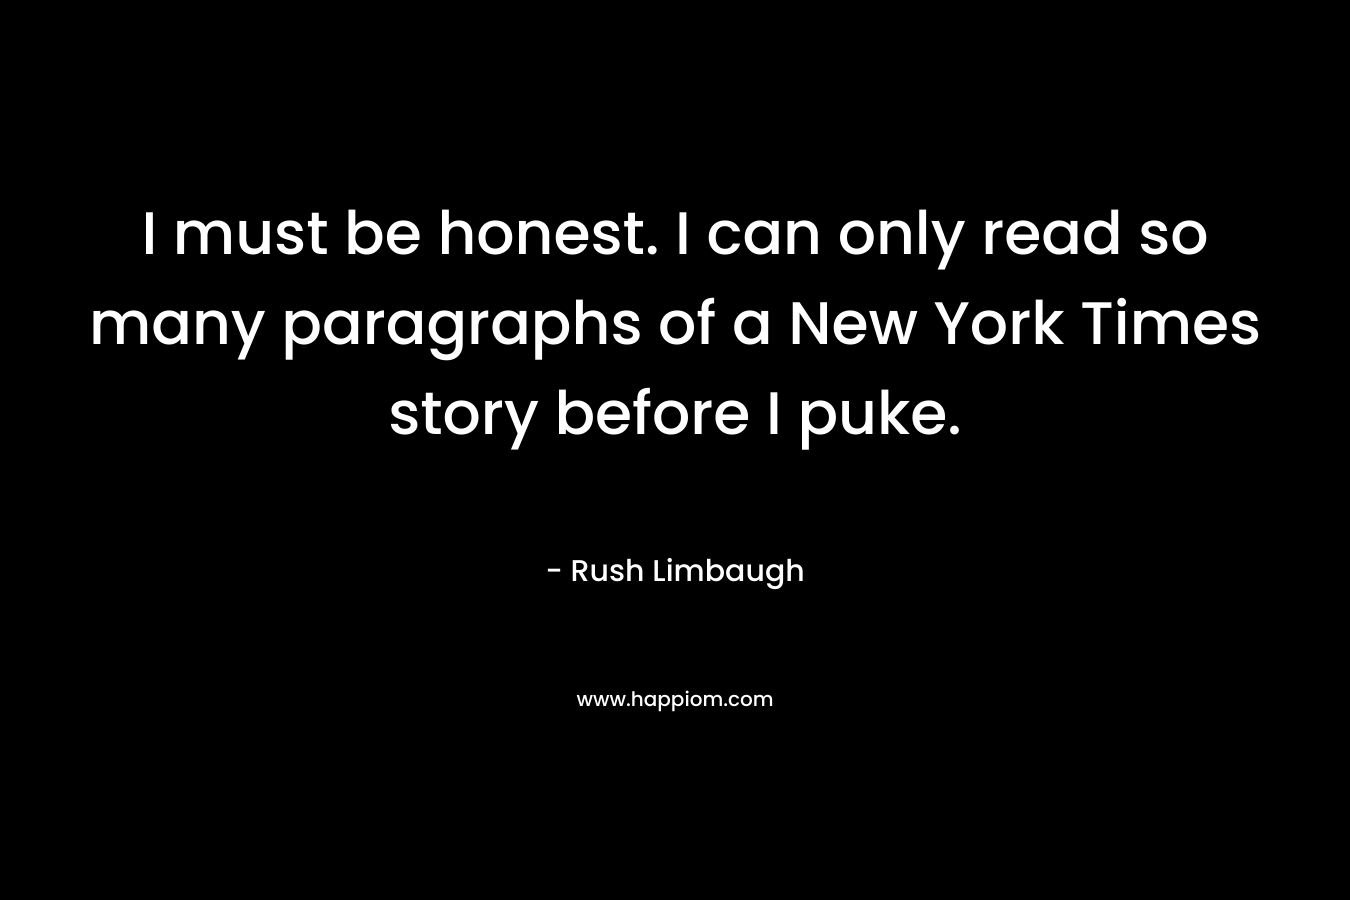 I must be honest. I can only read so many paragraphs of a New York Times story before I puke. – Rush Limbaugh